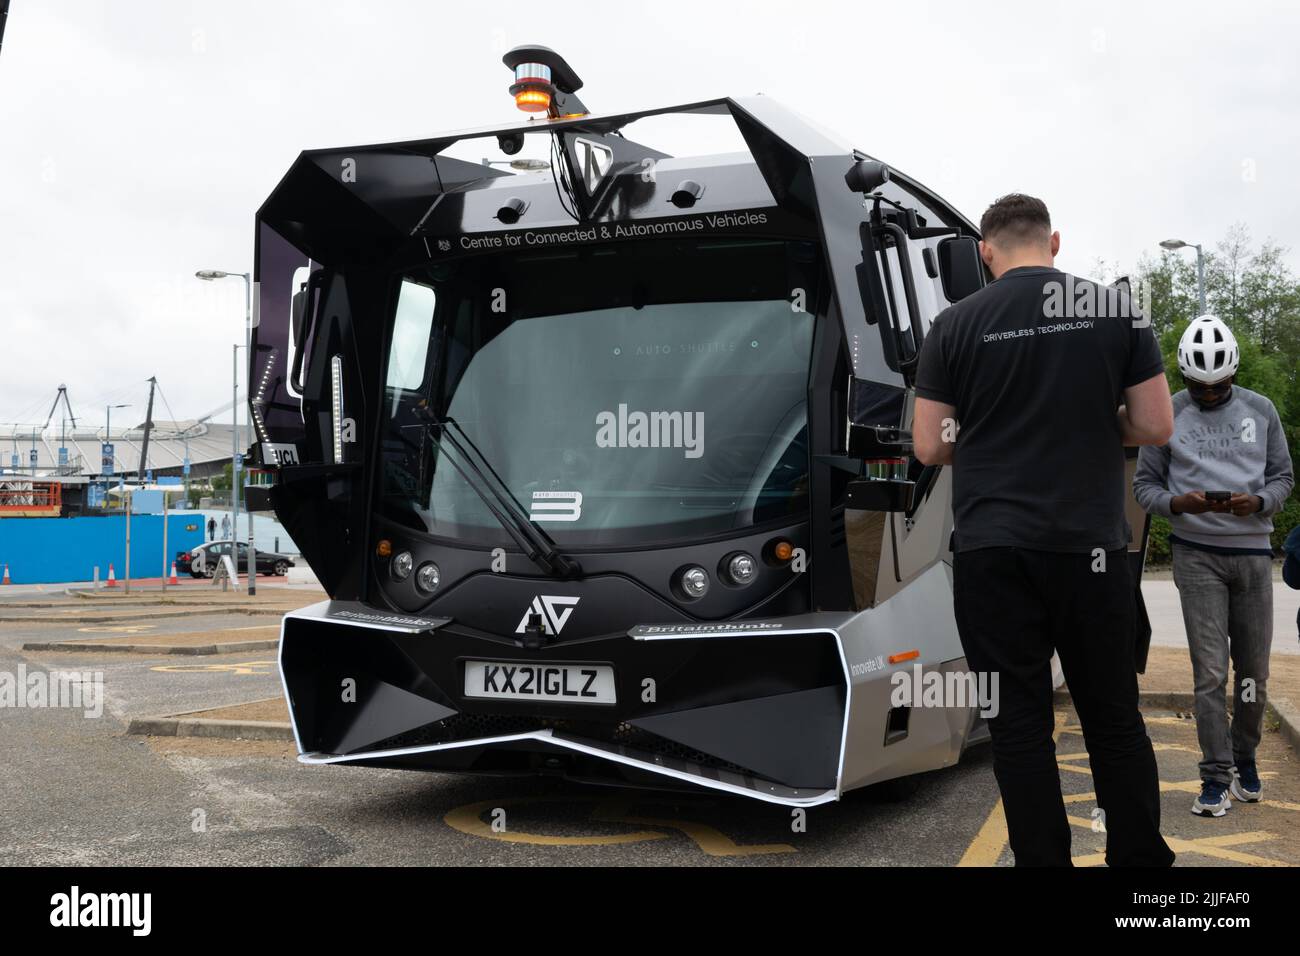 Aurrigo self driving auto-shuttle trial at Etihad Campus. Driverless bus with text Centre for Connected and Autonomous Vehicles. Stock Photo